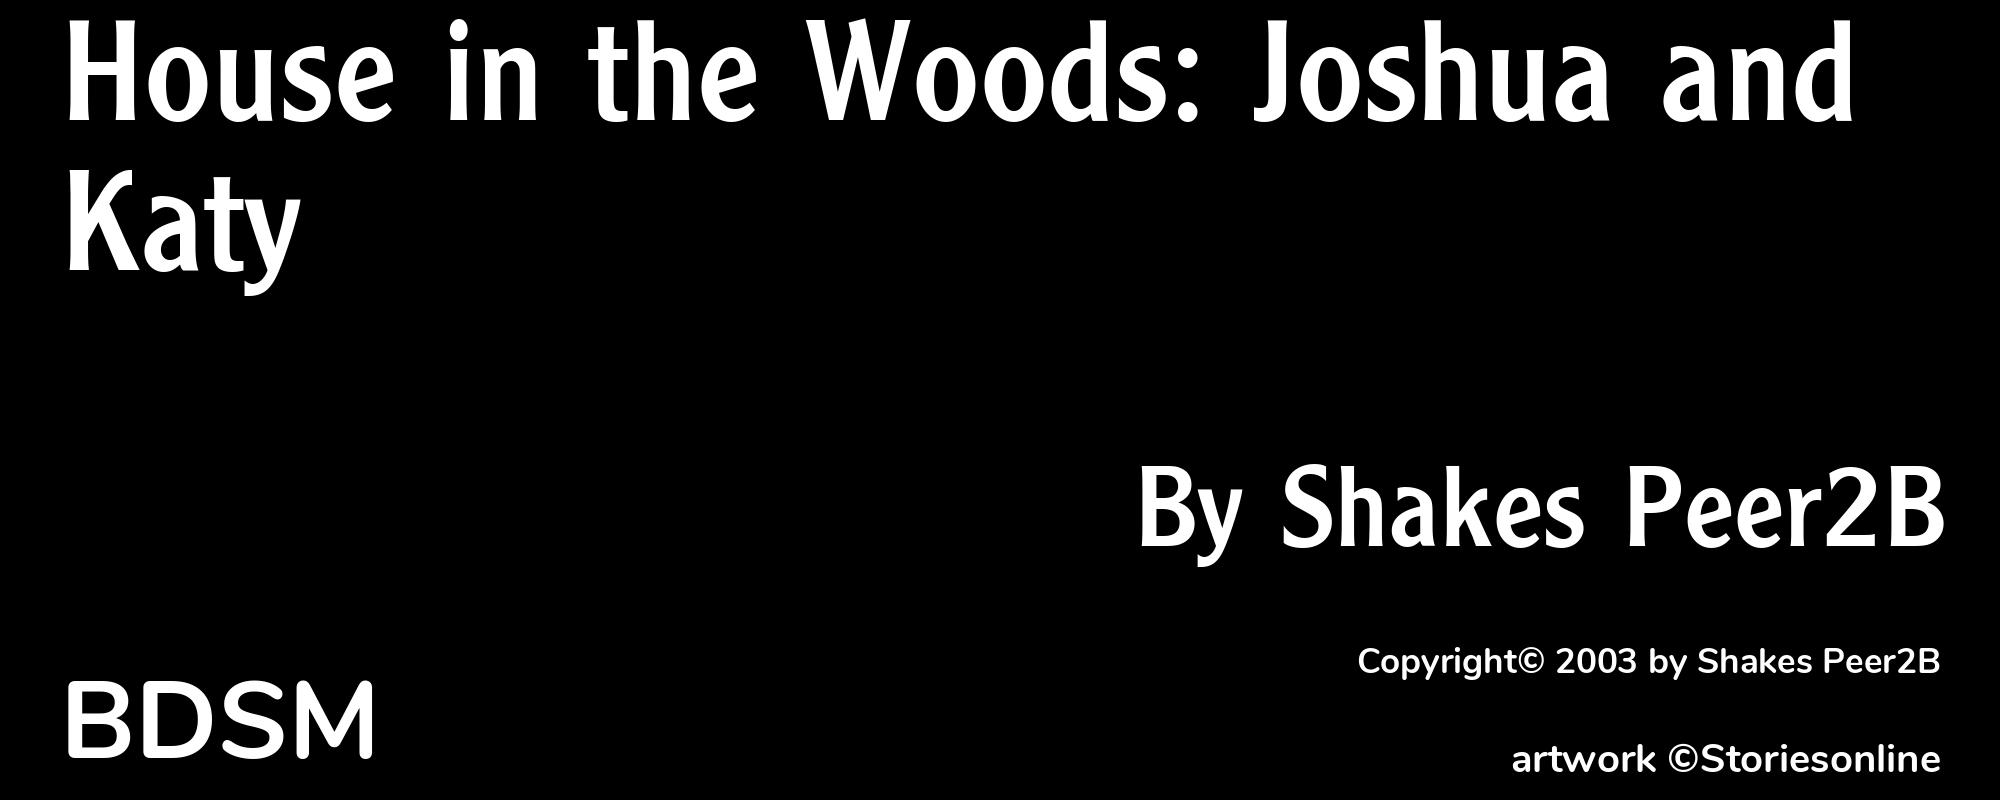 House in the Woods: Joshua and Katy - Cover